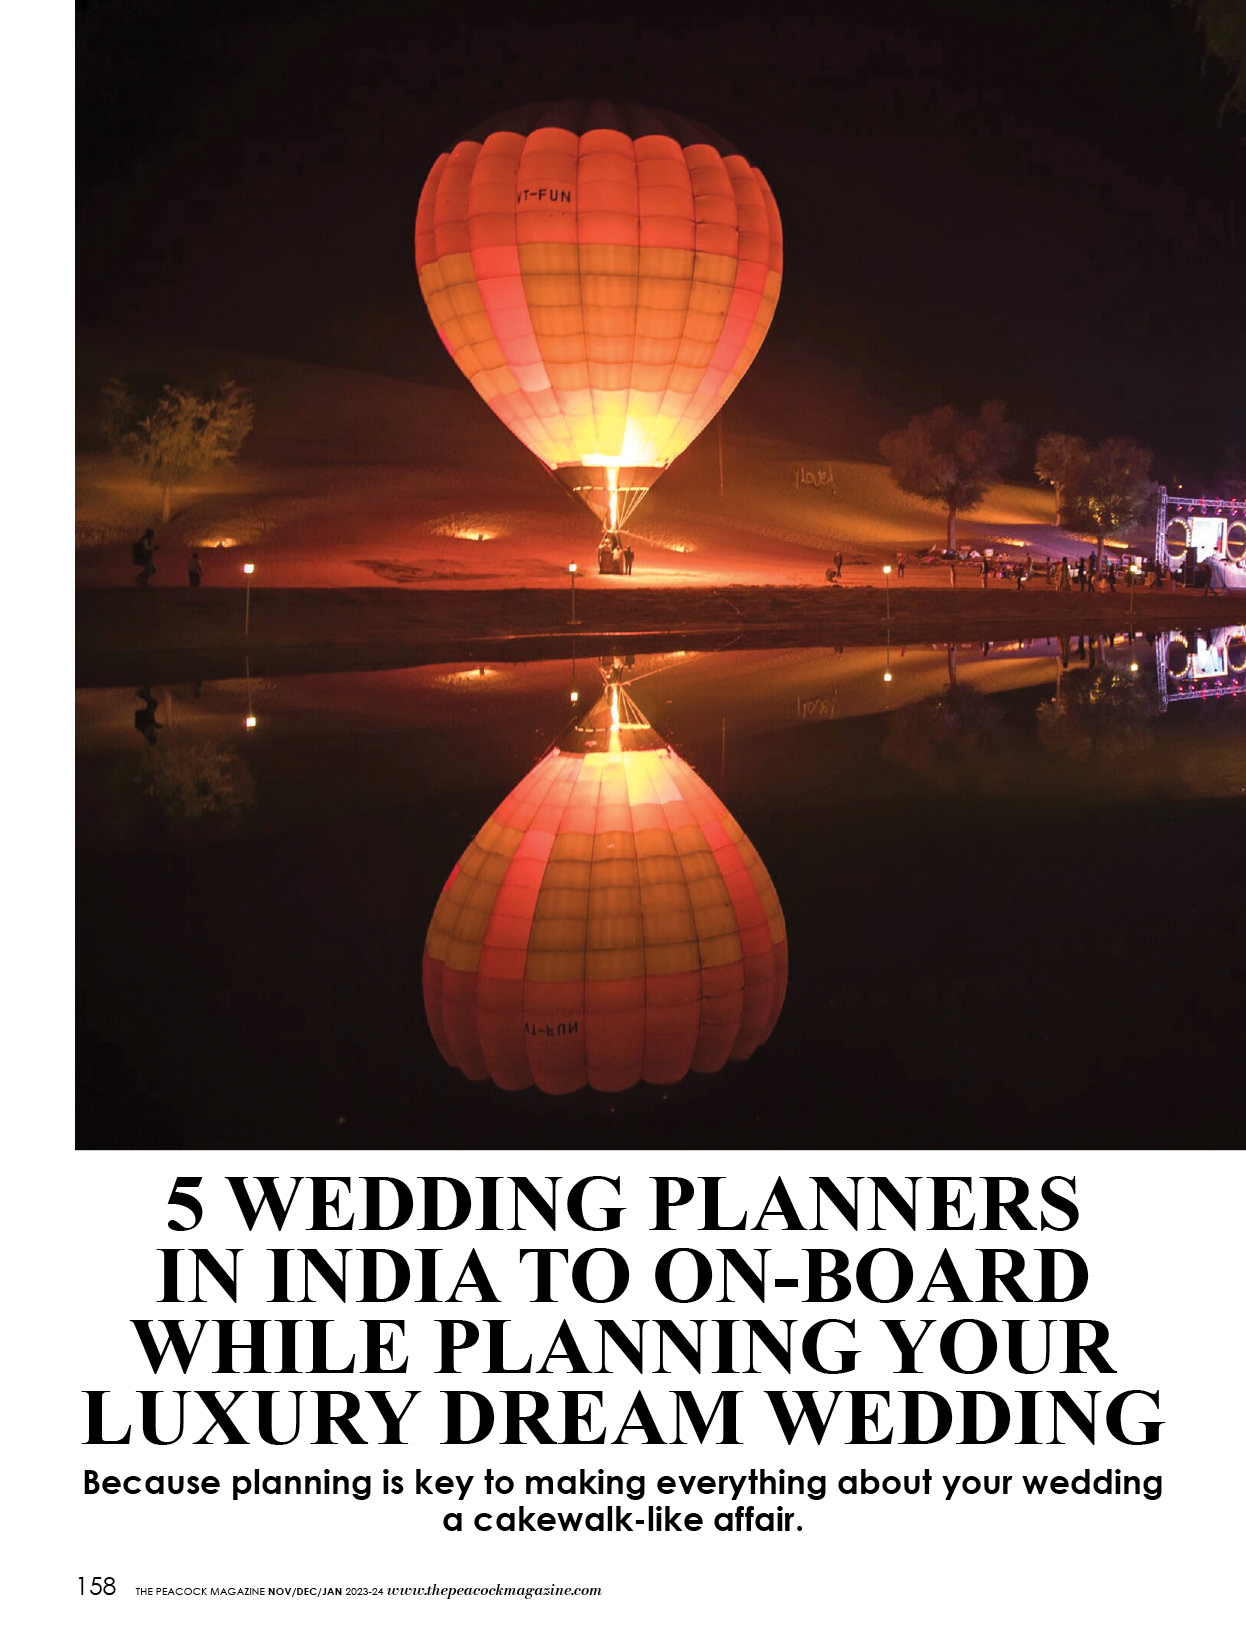 wedding planners in india